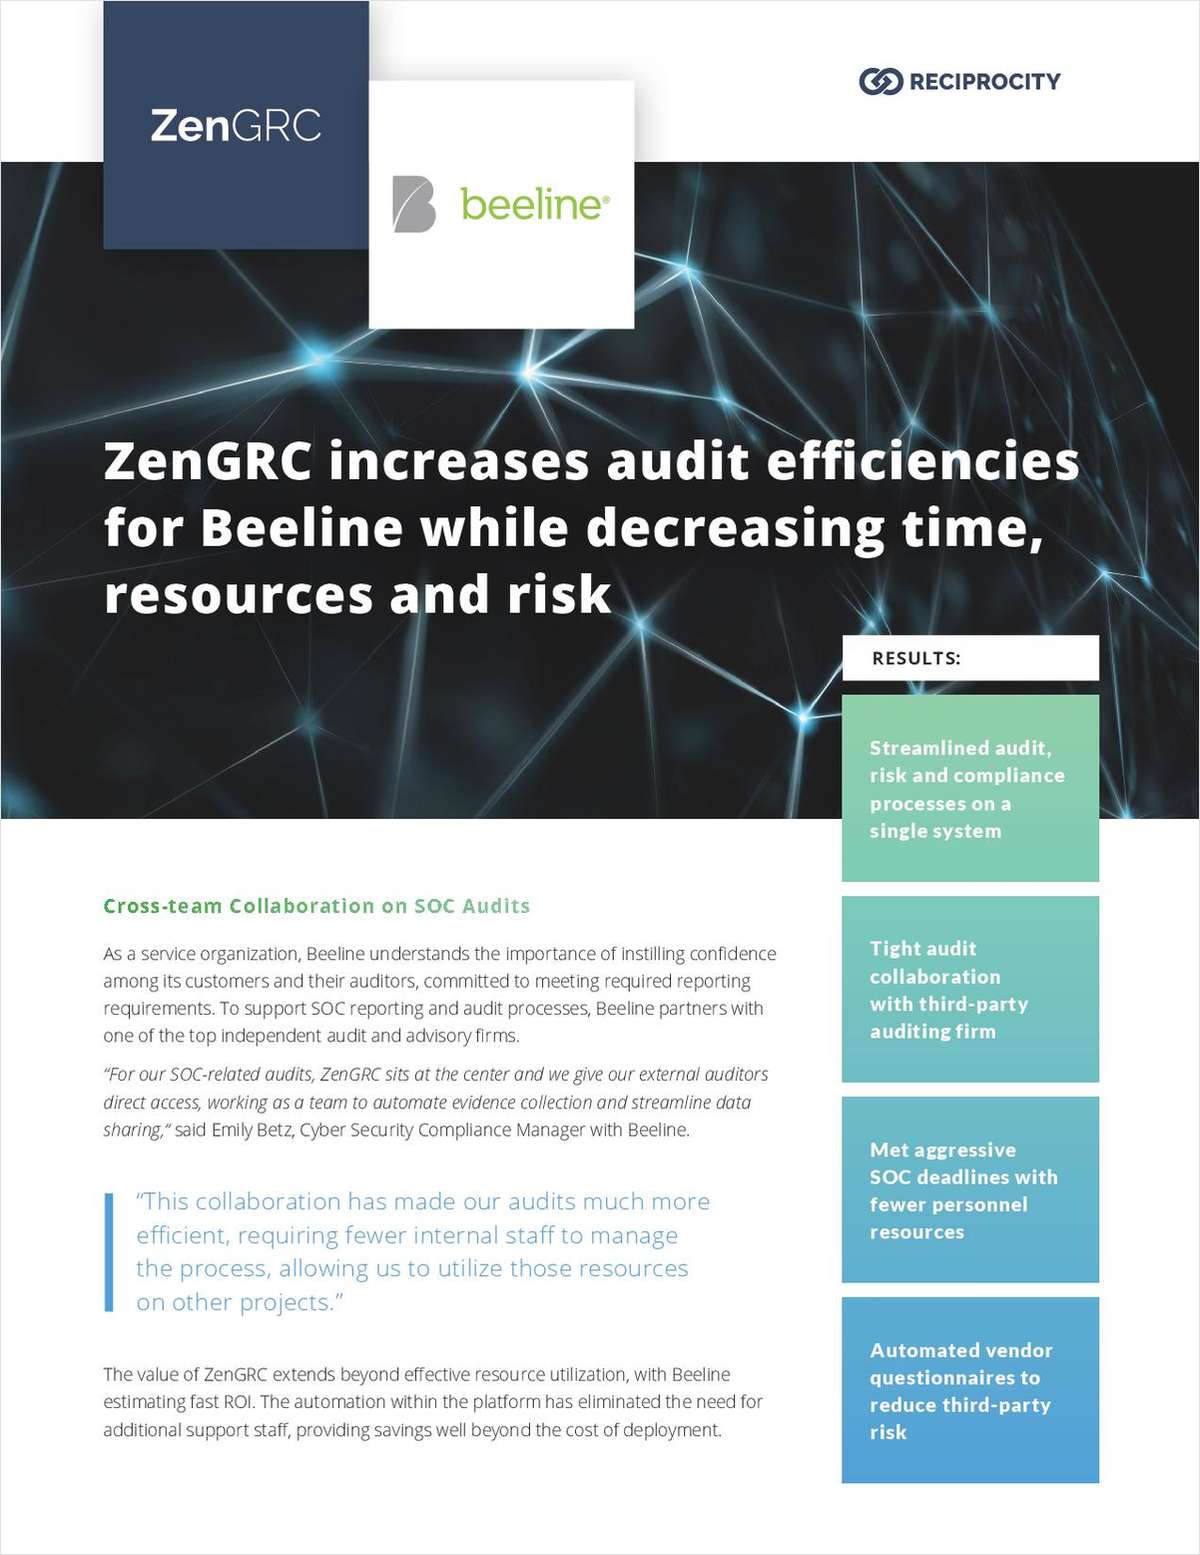 ZenGRC Increases Audit Efficiencies for Beeline While Decreasing, Time, Resources and Risk